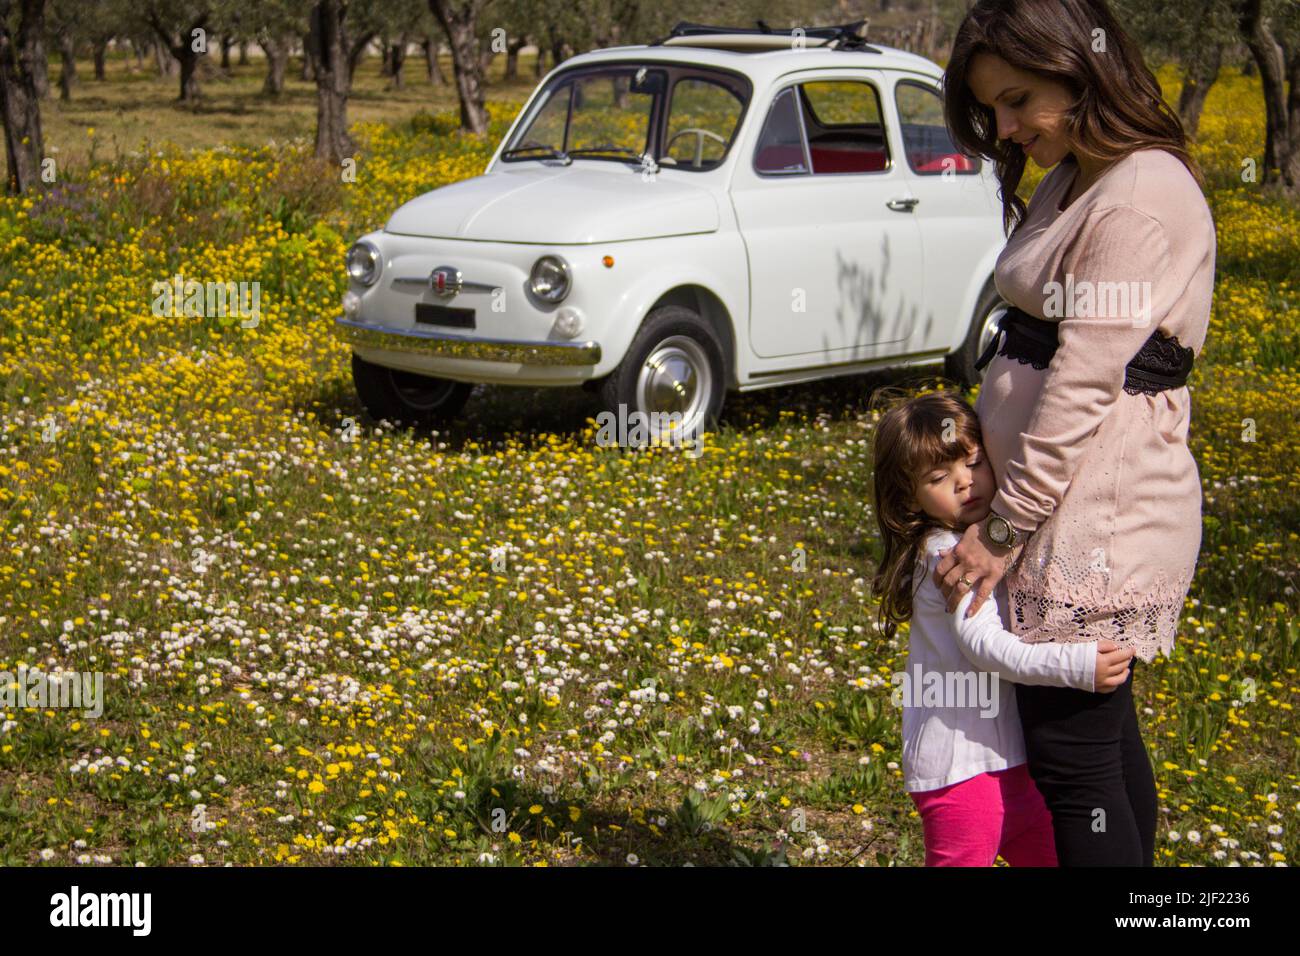 Image of a young expectant mother hugging her daughter in a flowery field with an old vintage car in the background. Vacation trip to Tuscany Italy Stock Photo